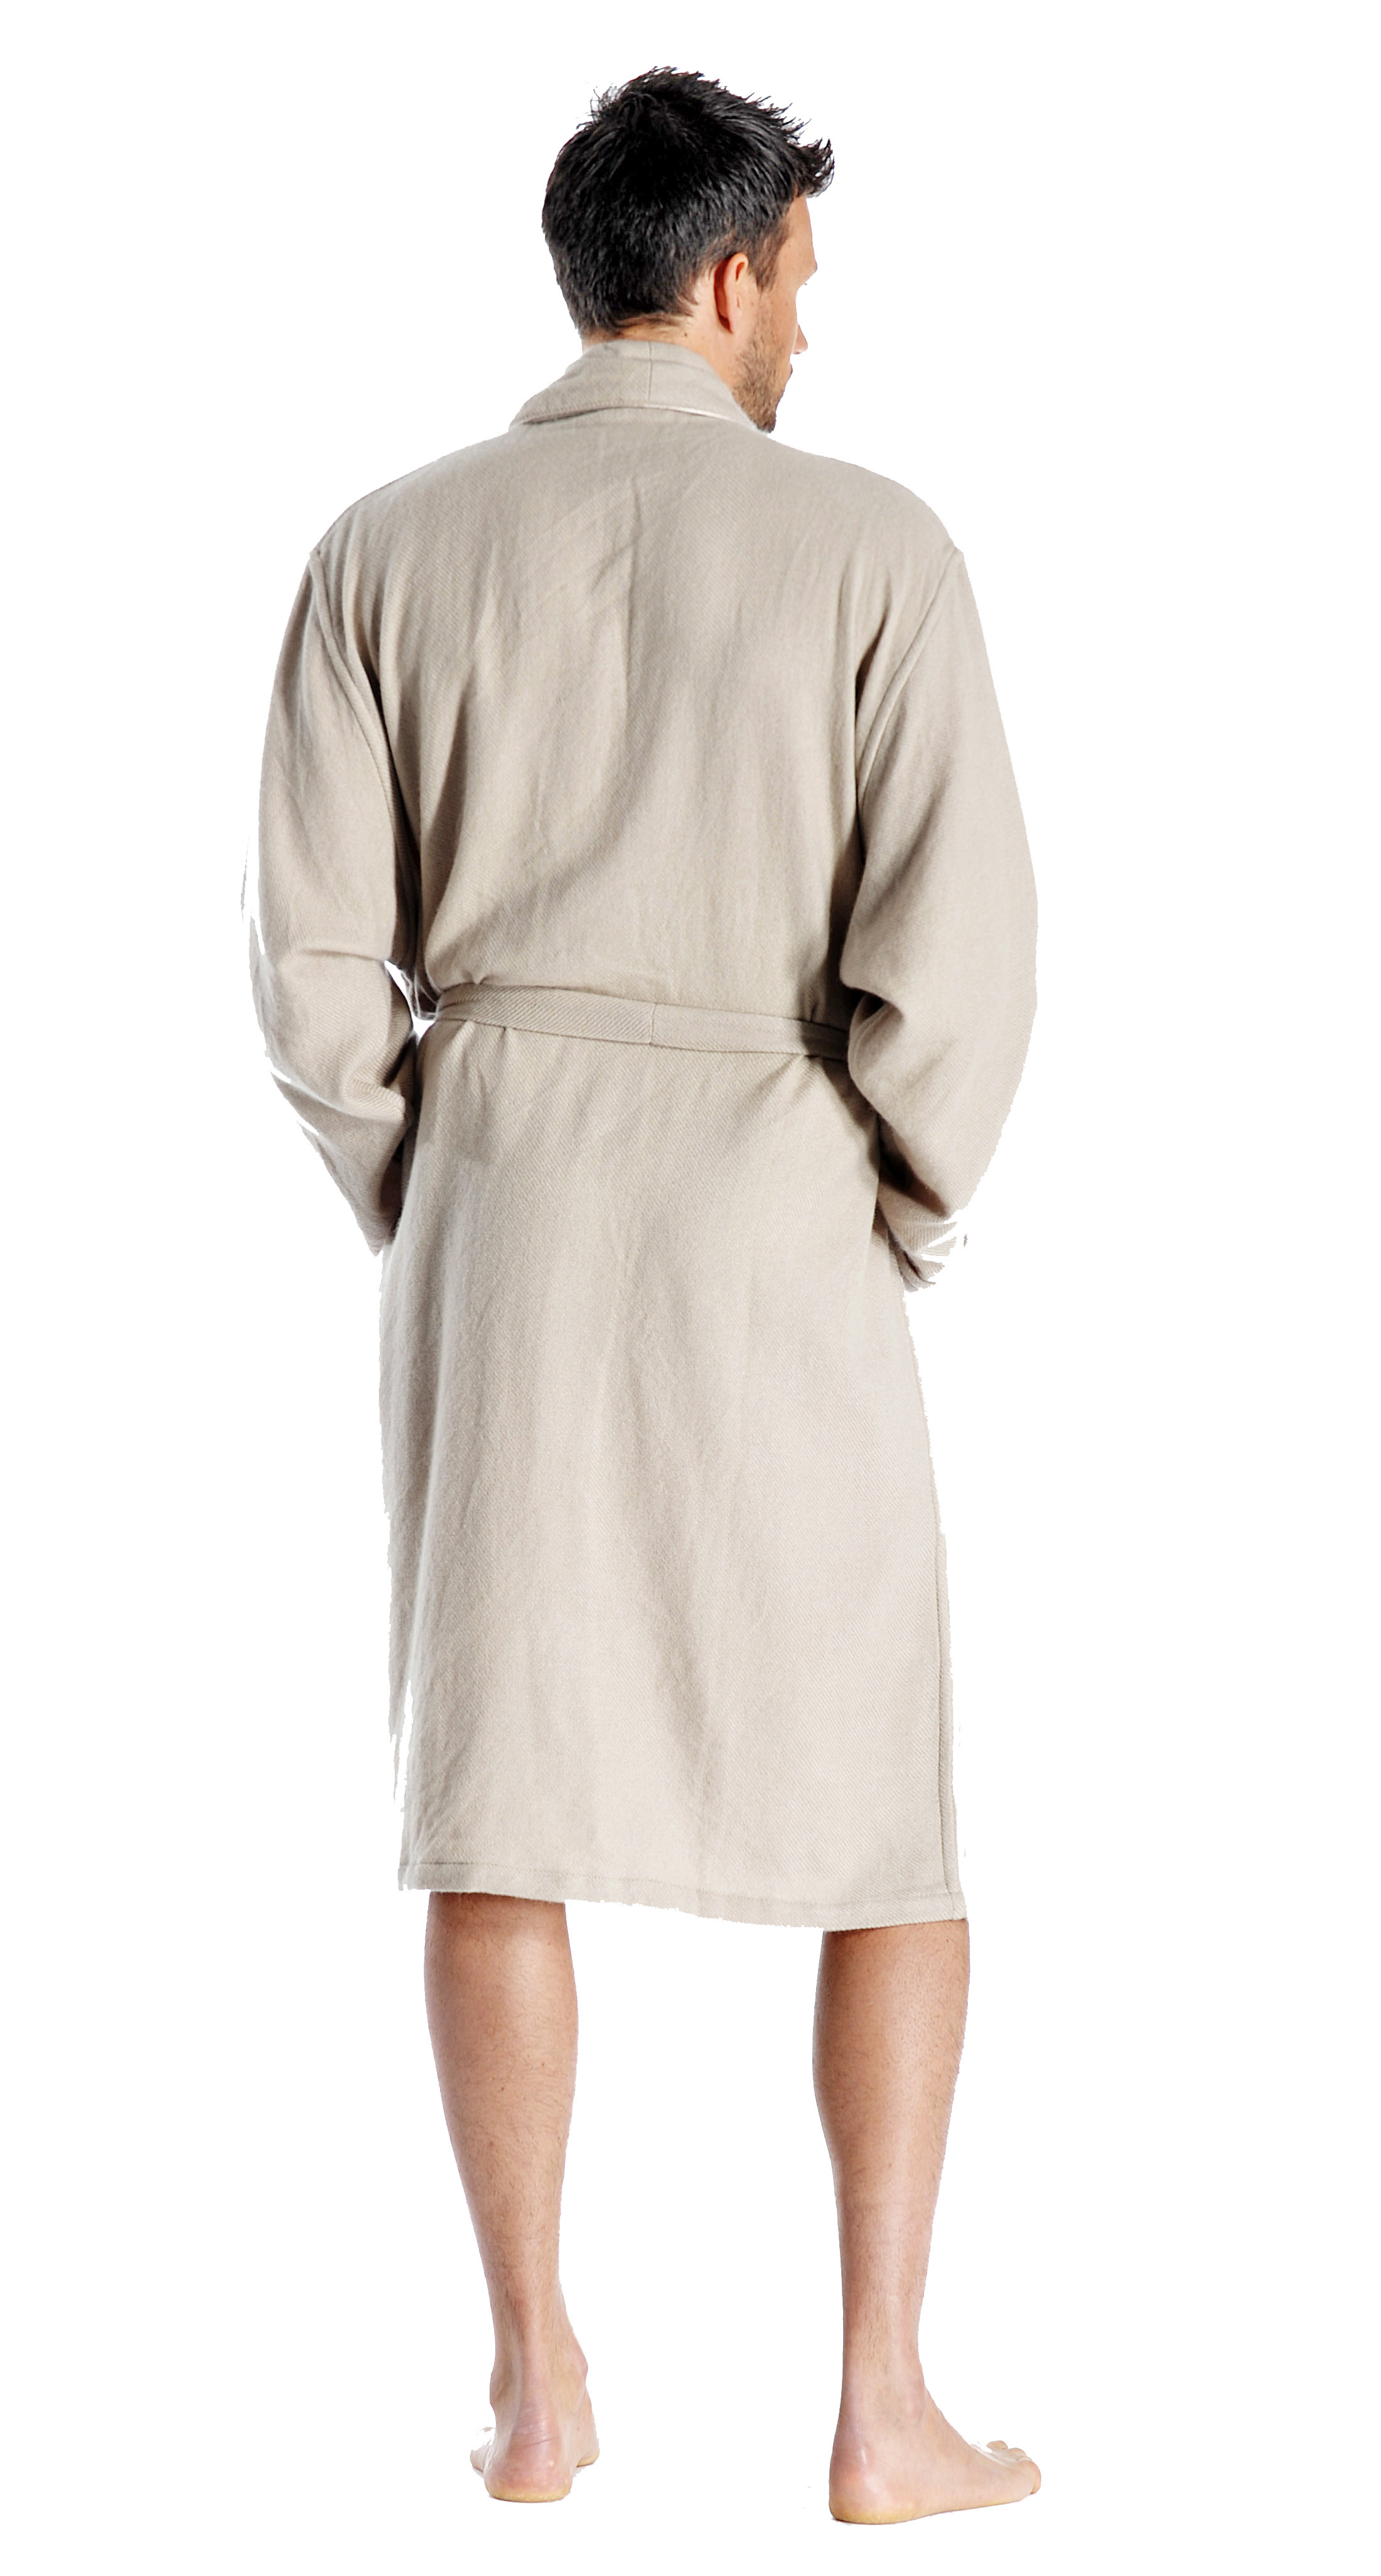 Pure Cashmere Knee Length Robe for Men (Black, Large/Extra Large)